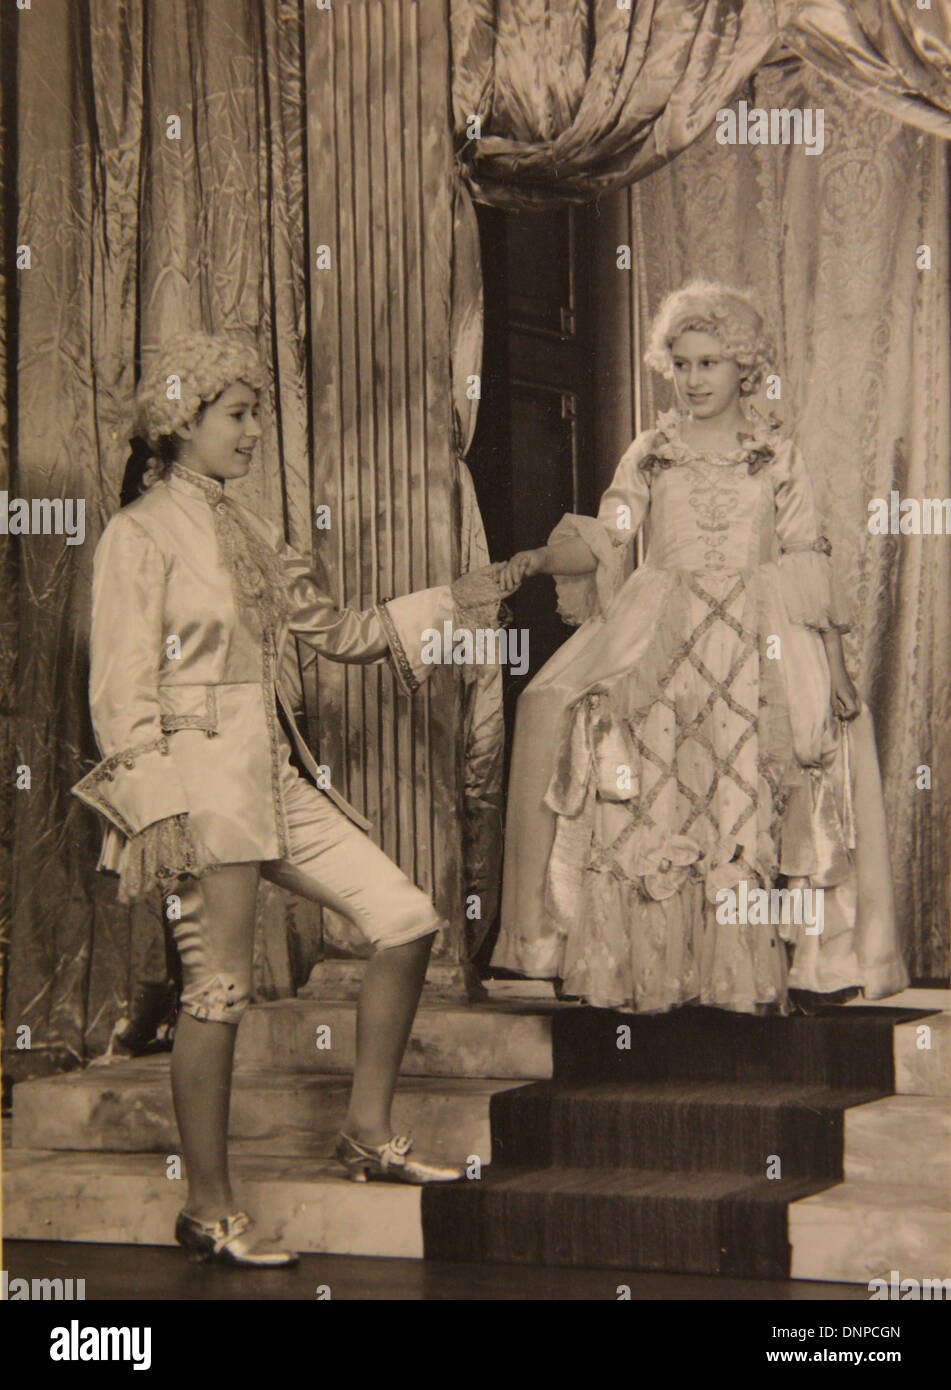 A photograph of Princess Margaret (right) and Princess Elizabeth (left) in the play Aladdin, 1943 Stock Photo